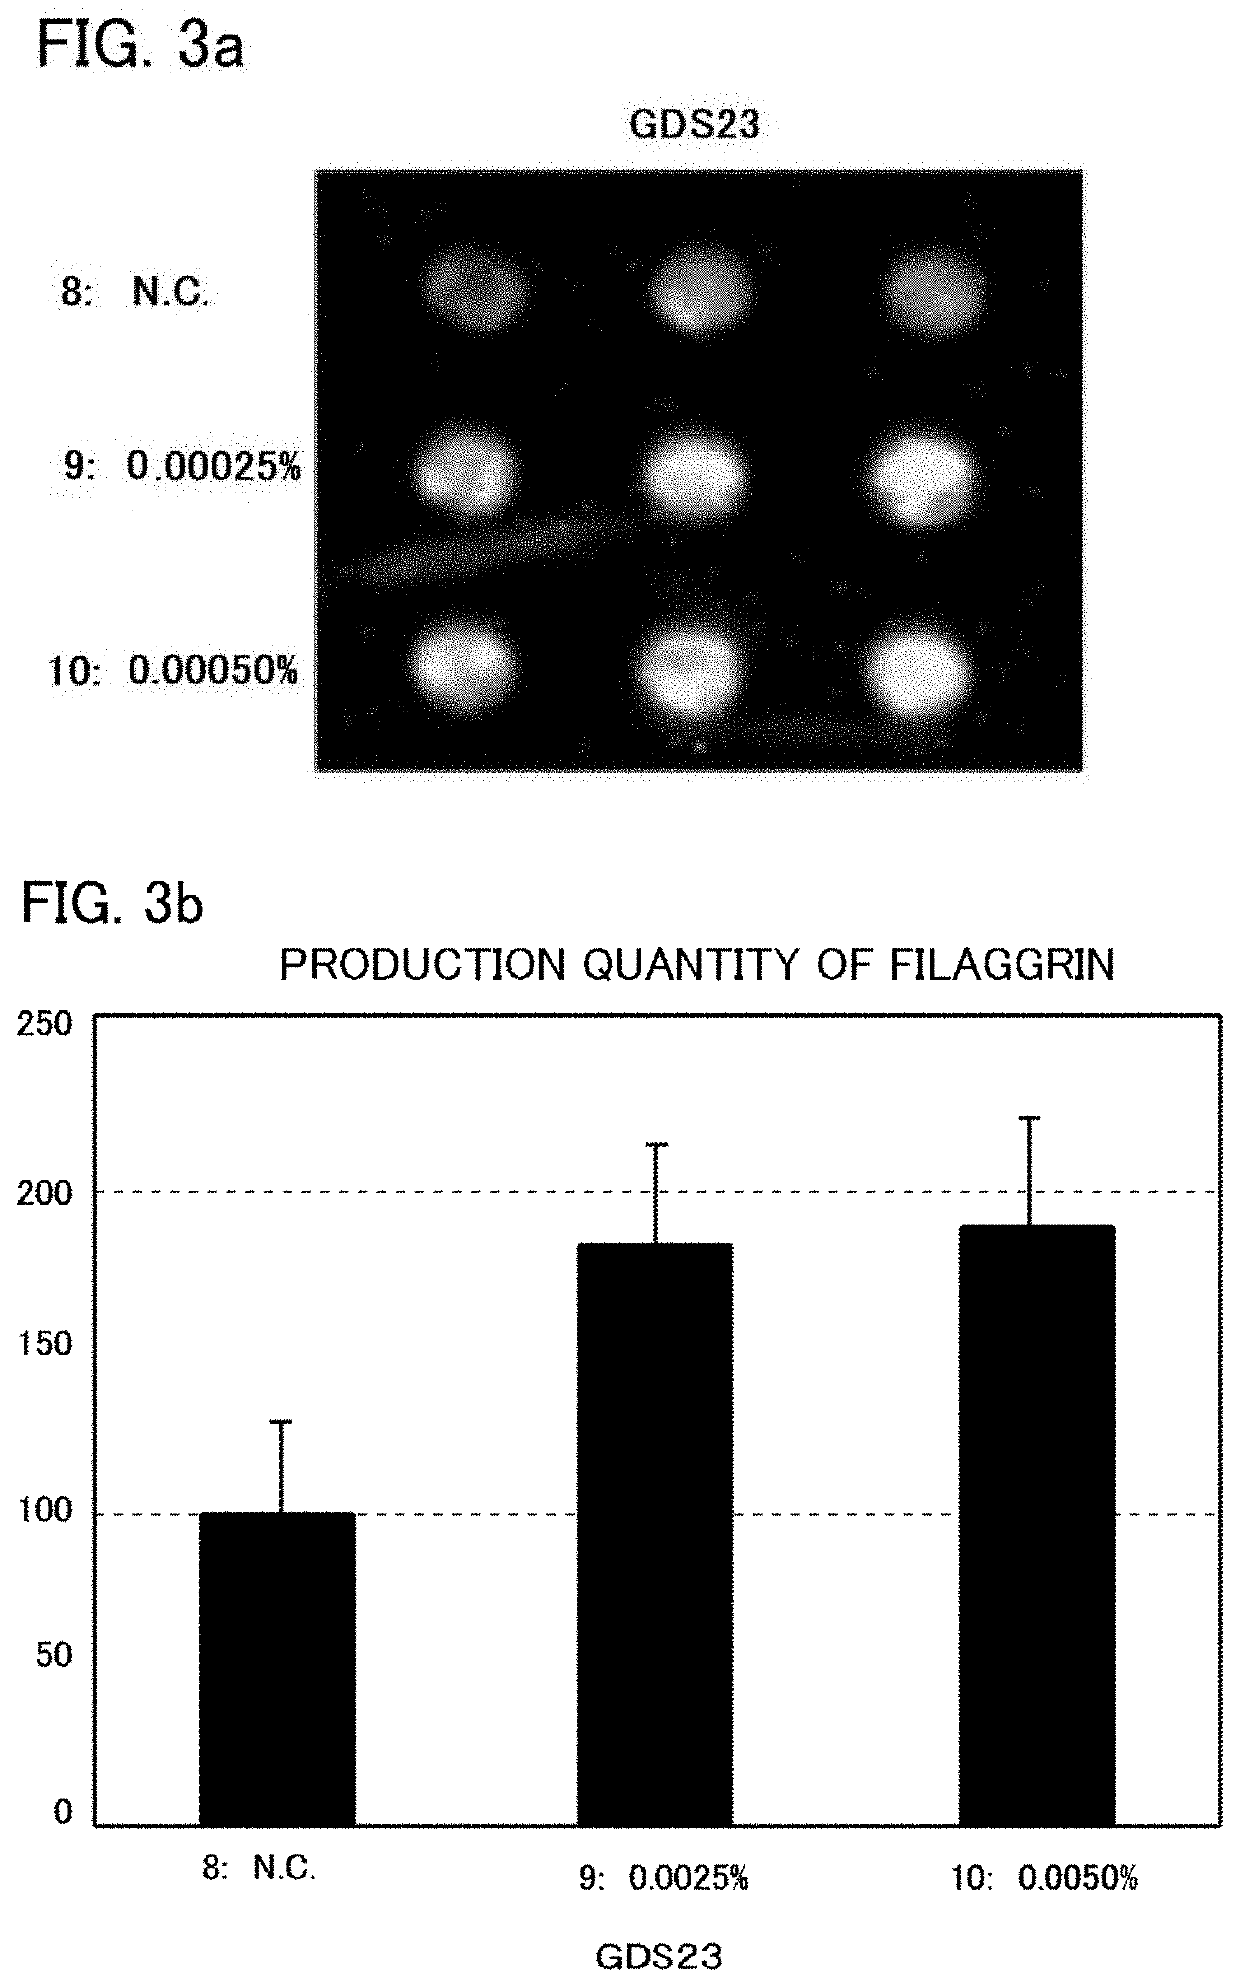 Method for enhancing expression of moisturizing-related substance in epidermis